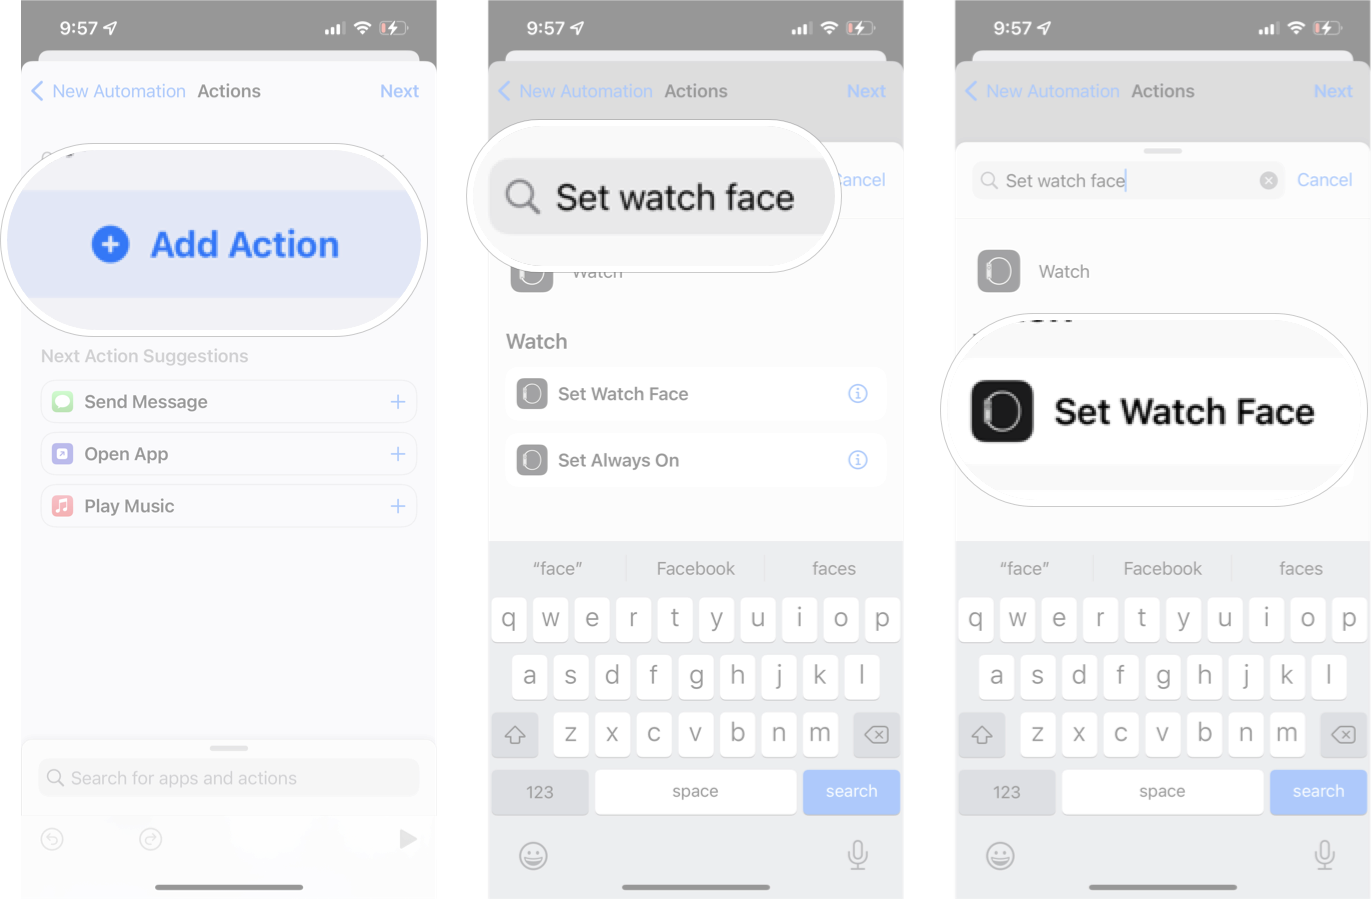 Adding Action To Location Based Automation: Tap Add Action, type Set watch face in the search bar, and then tap Set Watch Face.